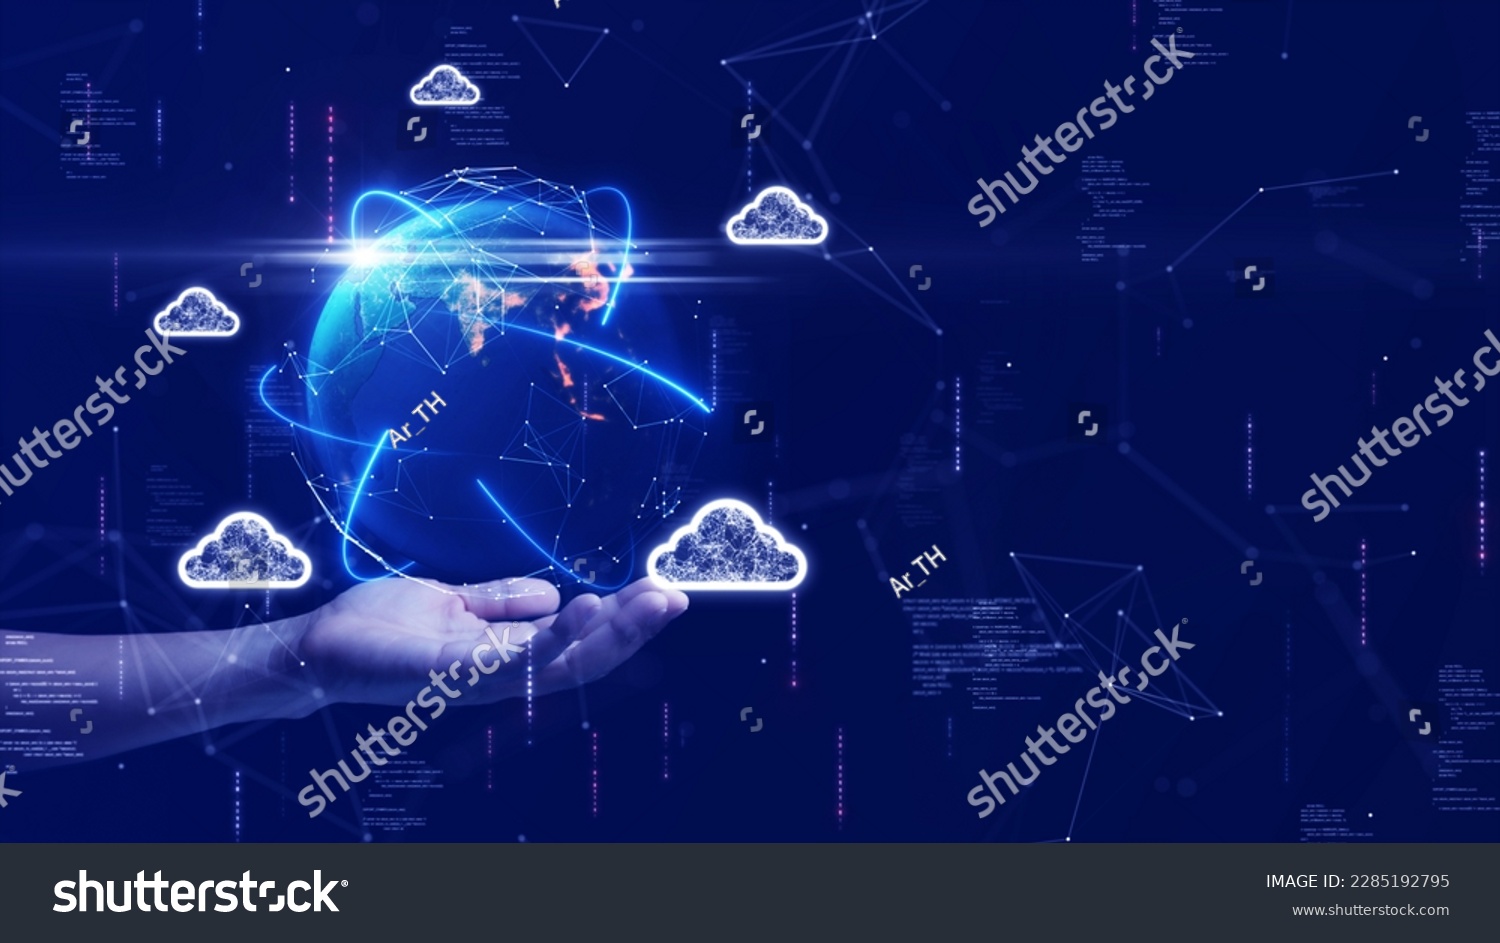 cloud and edge computing technology. Secure database storage is protected from unauthorized access and cyber threats. Polygons and interconnected global cloud network on dark blue background. #2285192795